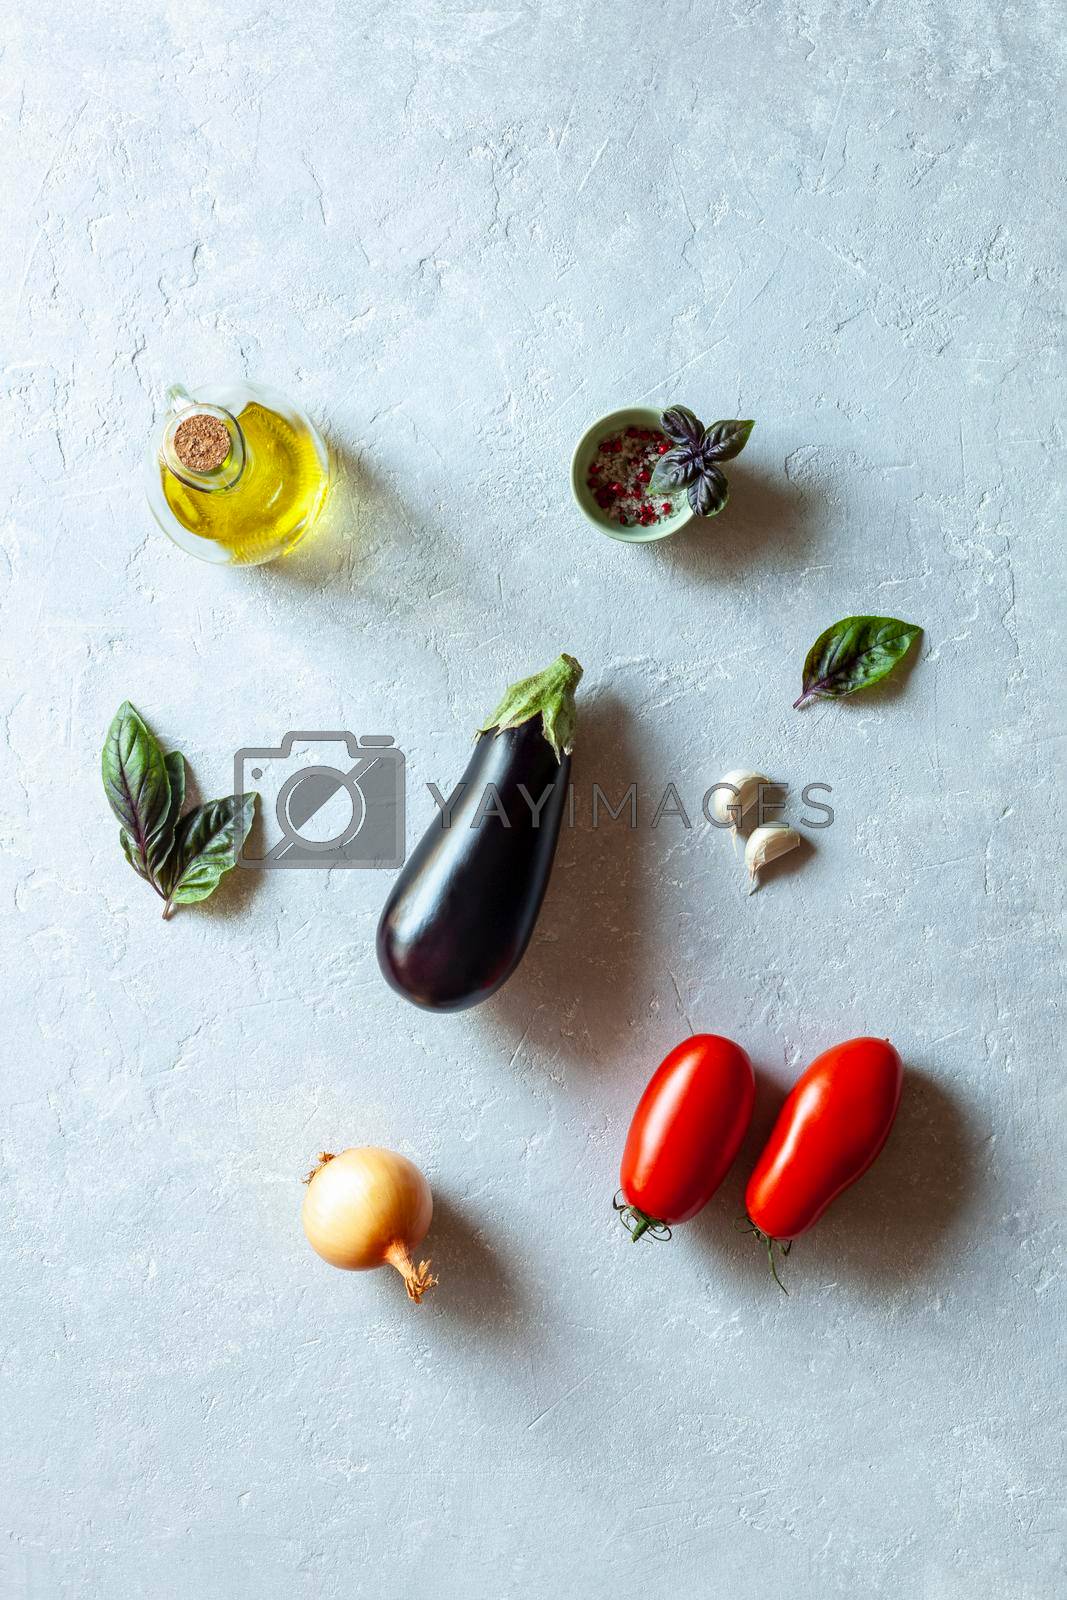 Royalty free image of Vegetables of mediterranean cuisine on grey background by lanych